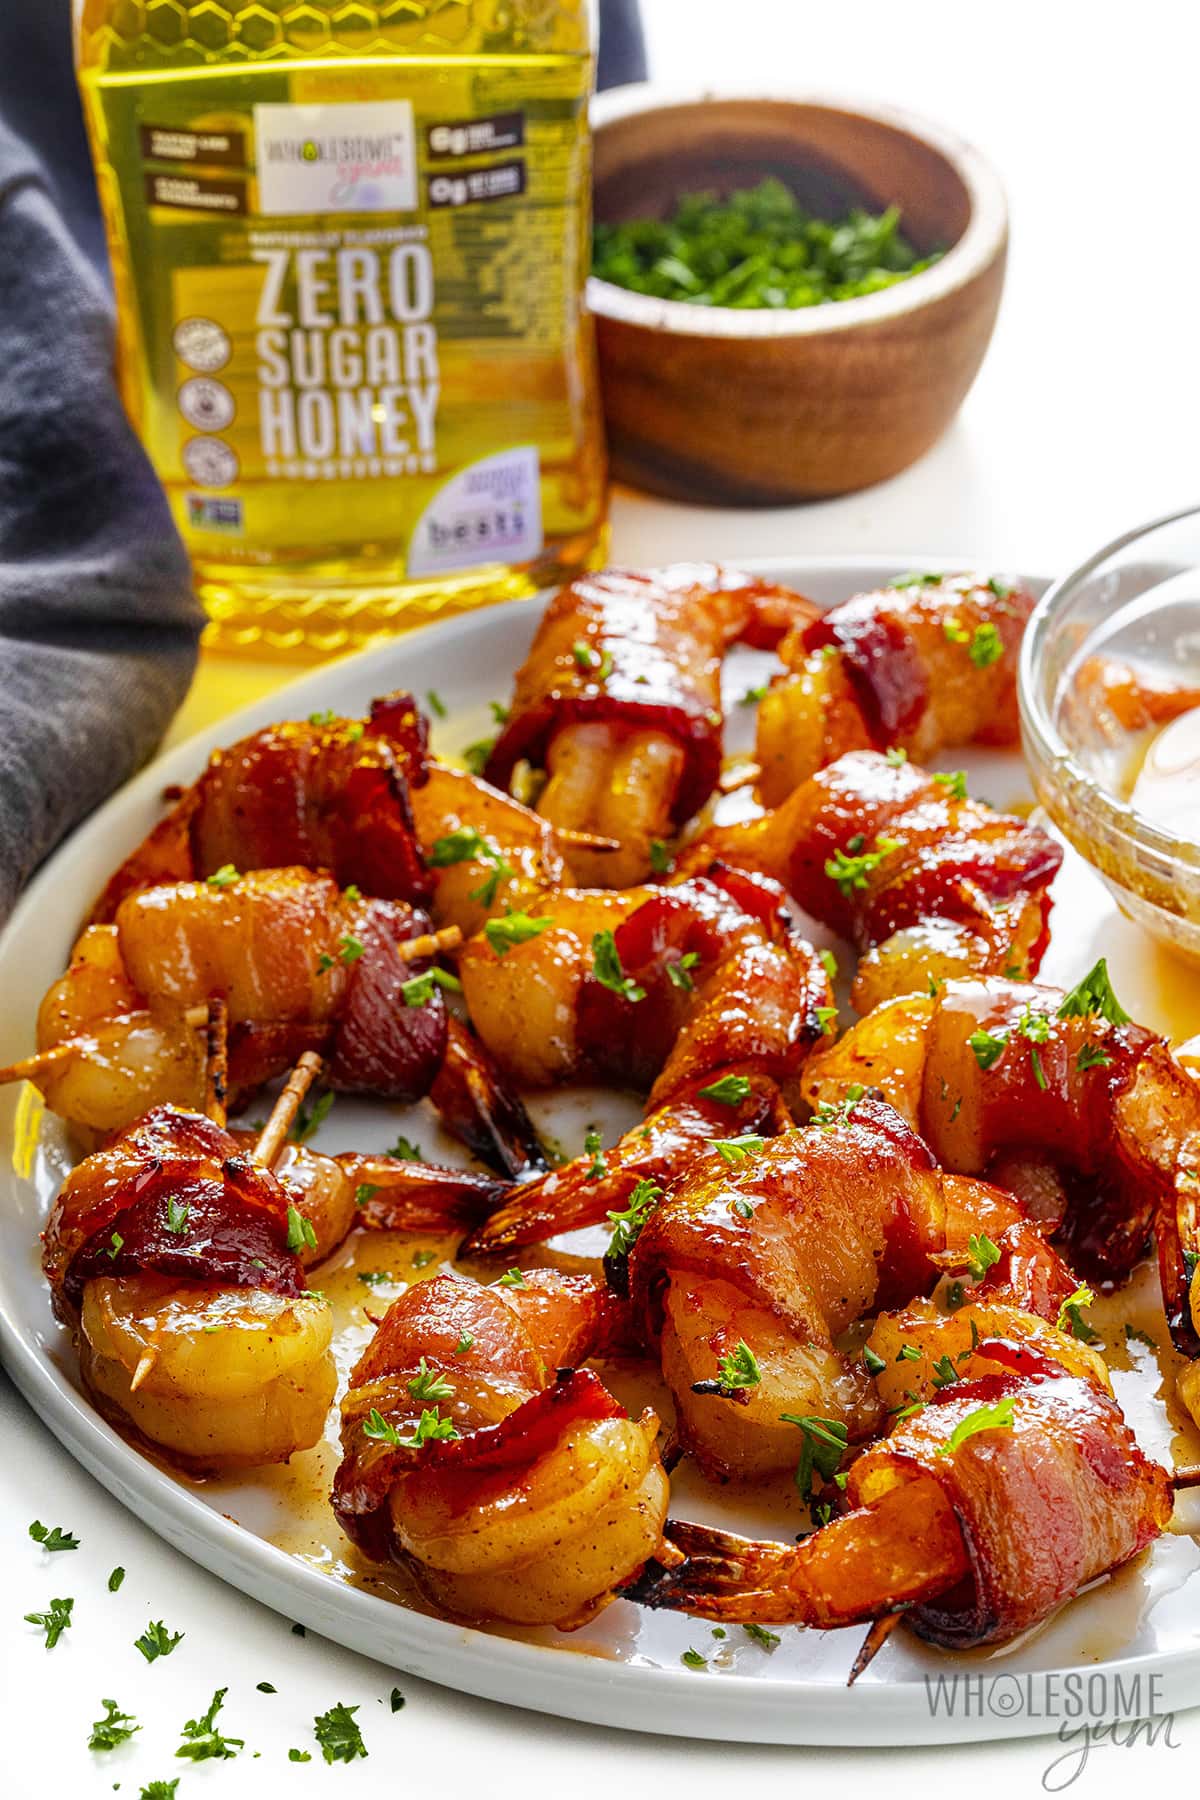 Shrimp wrapped in bacon on a plate next to sauce and zero sugar honey.